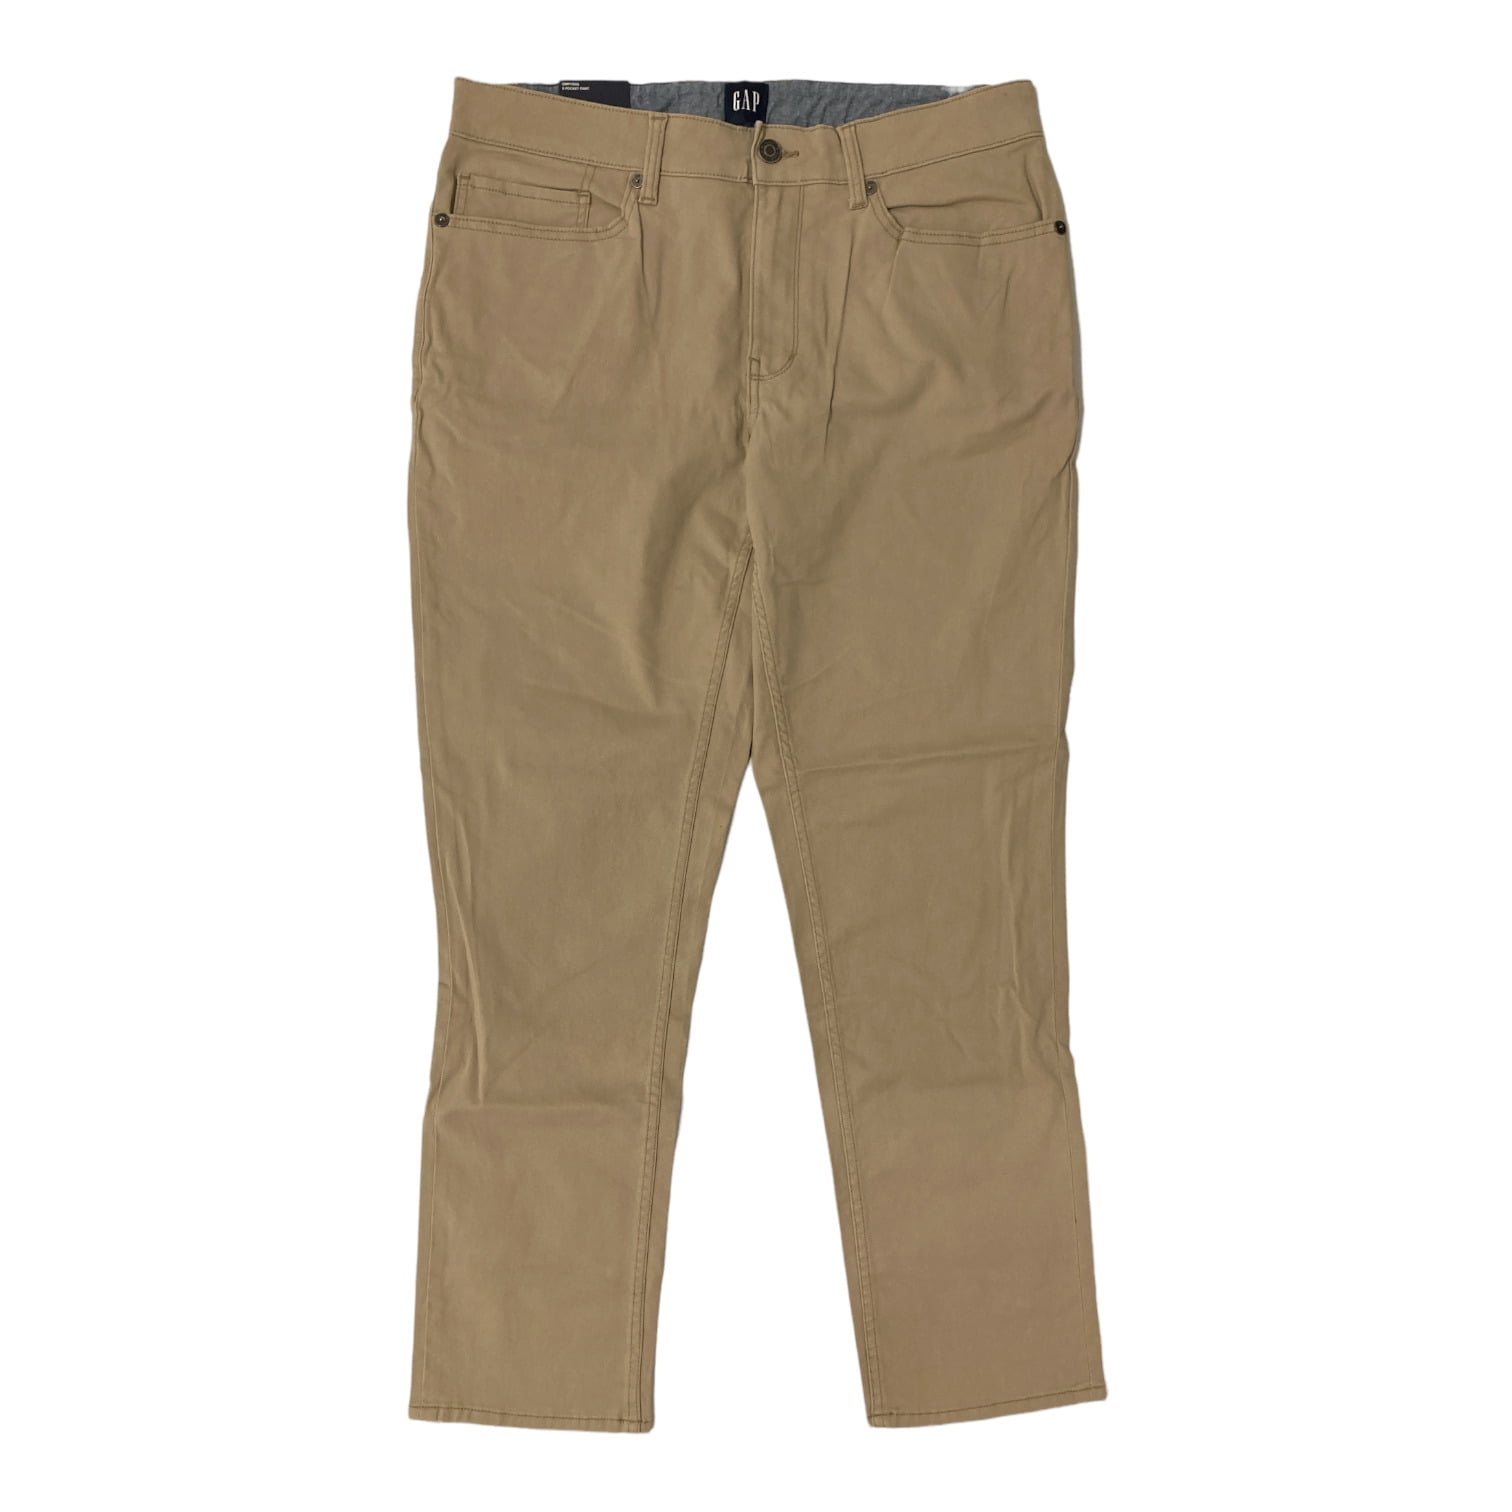 GAP Ladies Twill Pant | Women Working Pants | Twill Pant with Back Patch  Pocket